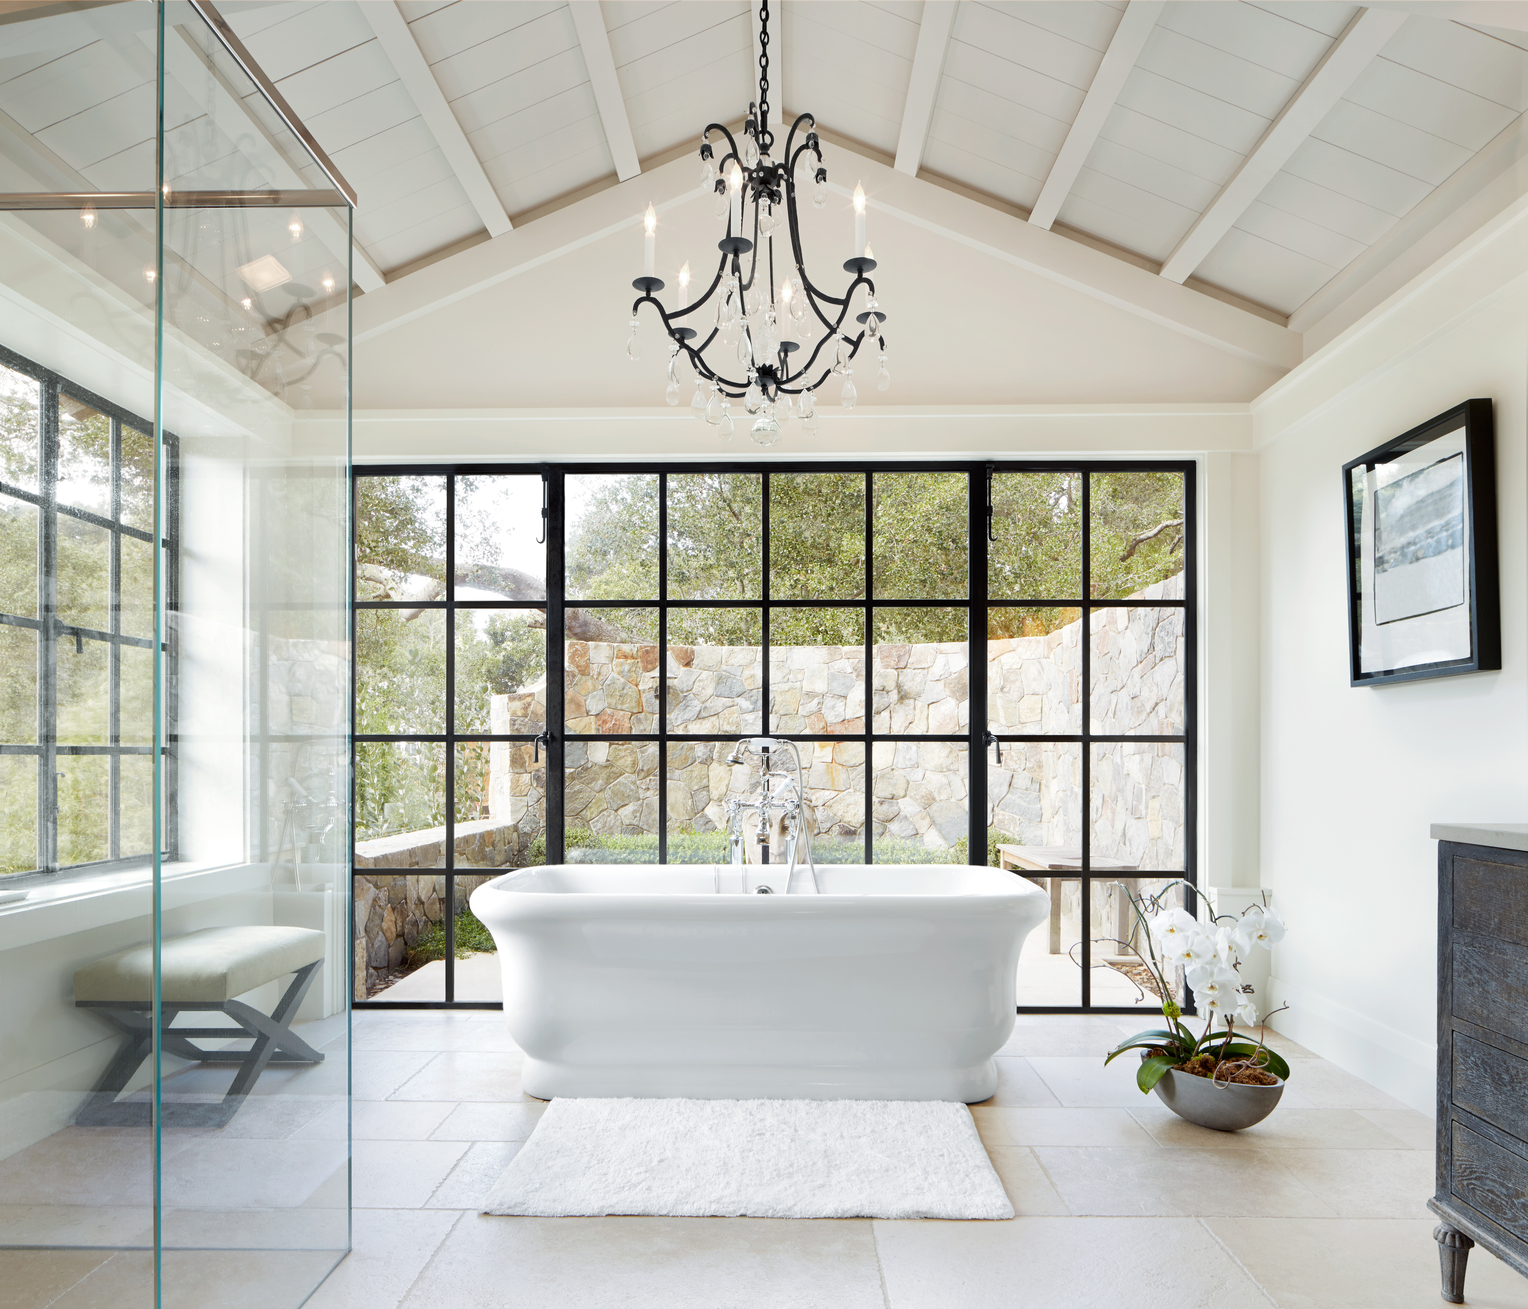 Image of a bathroom with a chandelier. 